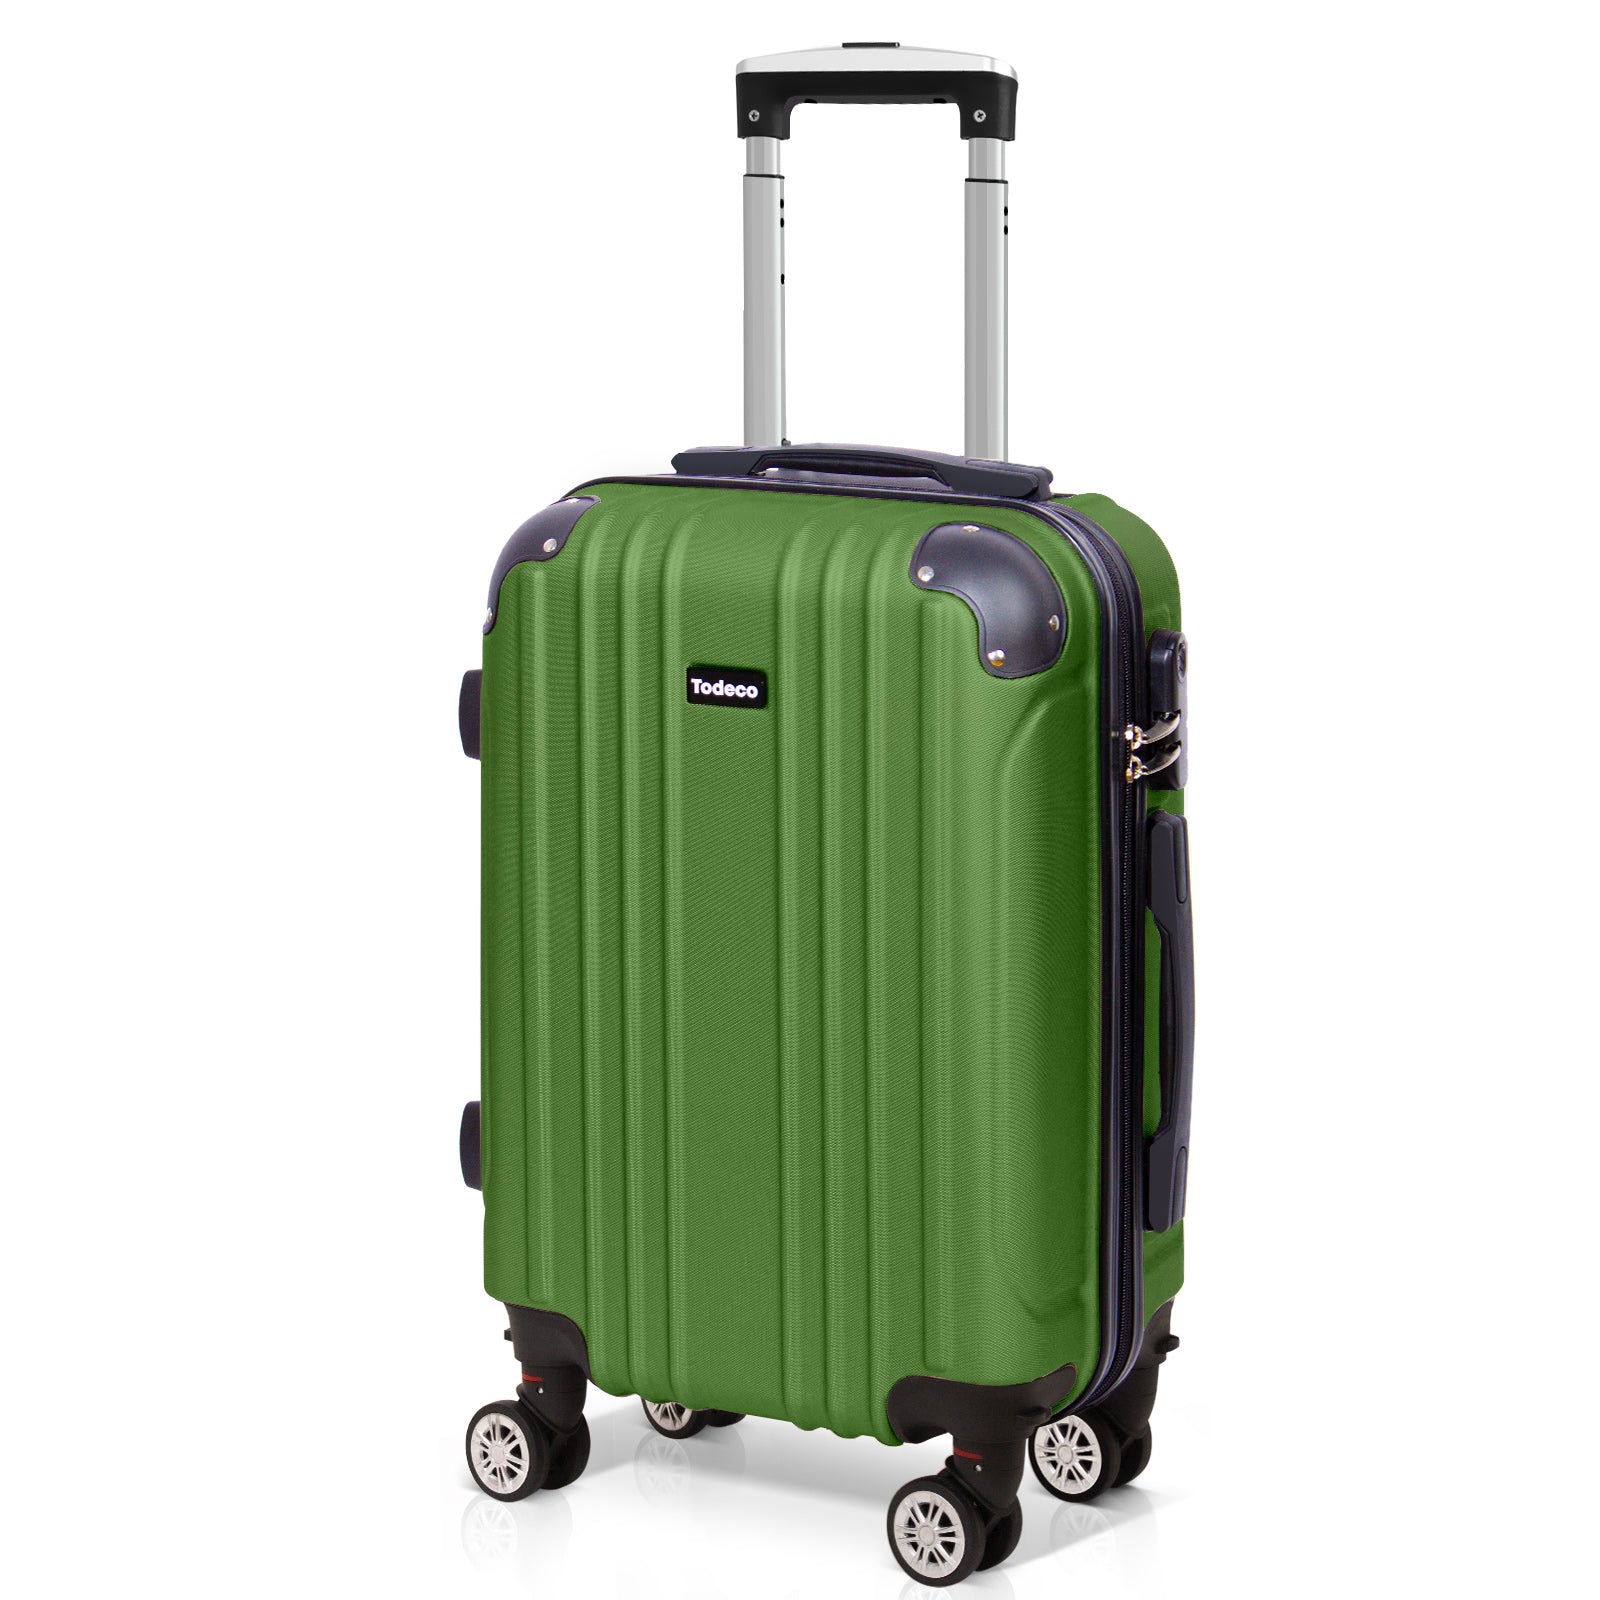 Cabin-Suitcase-55cm-Lightweight-Carry-on-Suitcase-with-Hard-Shell-Travel-Suitcase-Rigid-and-Lightweight-ABS-with-4-Double-Wheels-55x35x22cm-Olive-Green